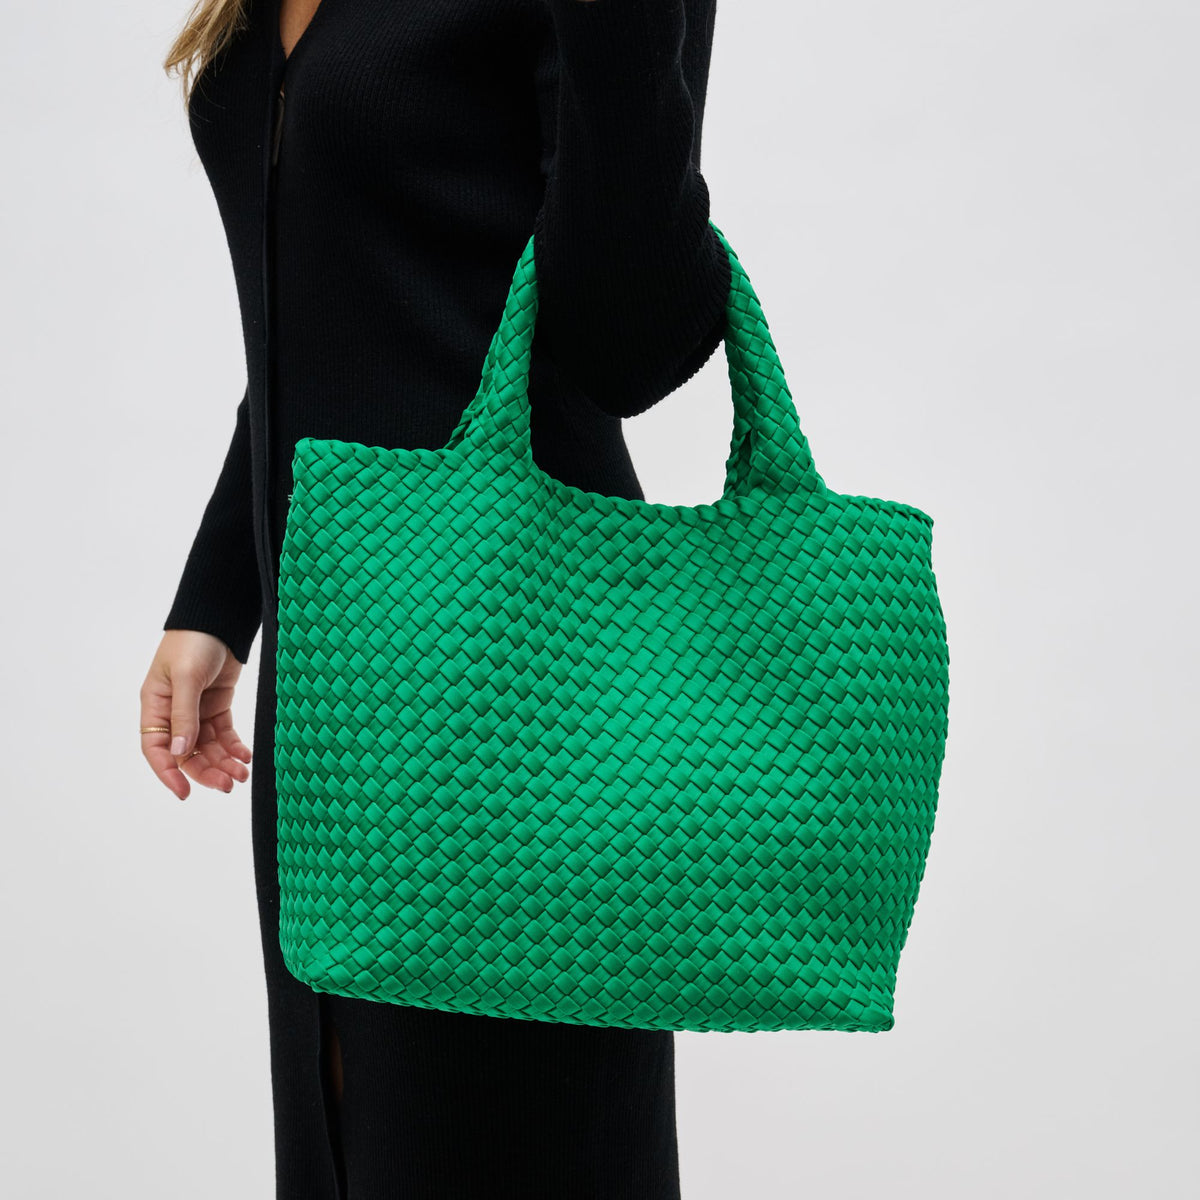 Woman wearing Kelly Green Sol and Selene Sky's The Limit - Medium Tote 841764108805 View 1 | Kelly Green